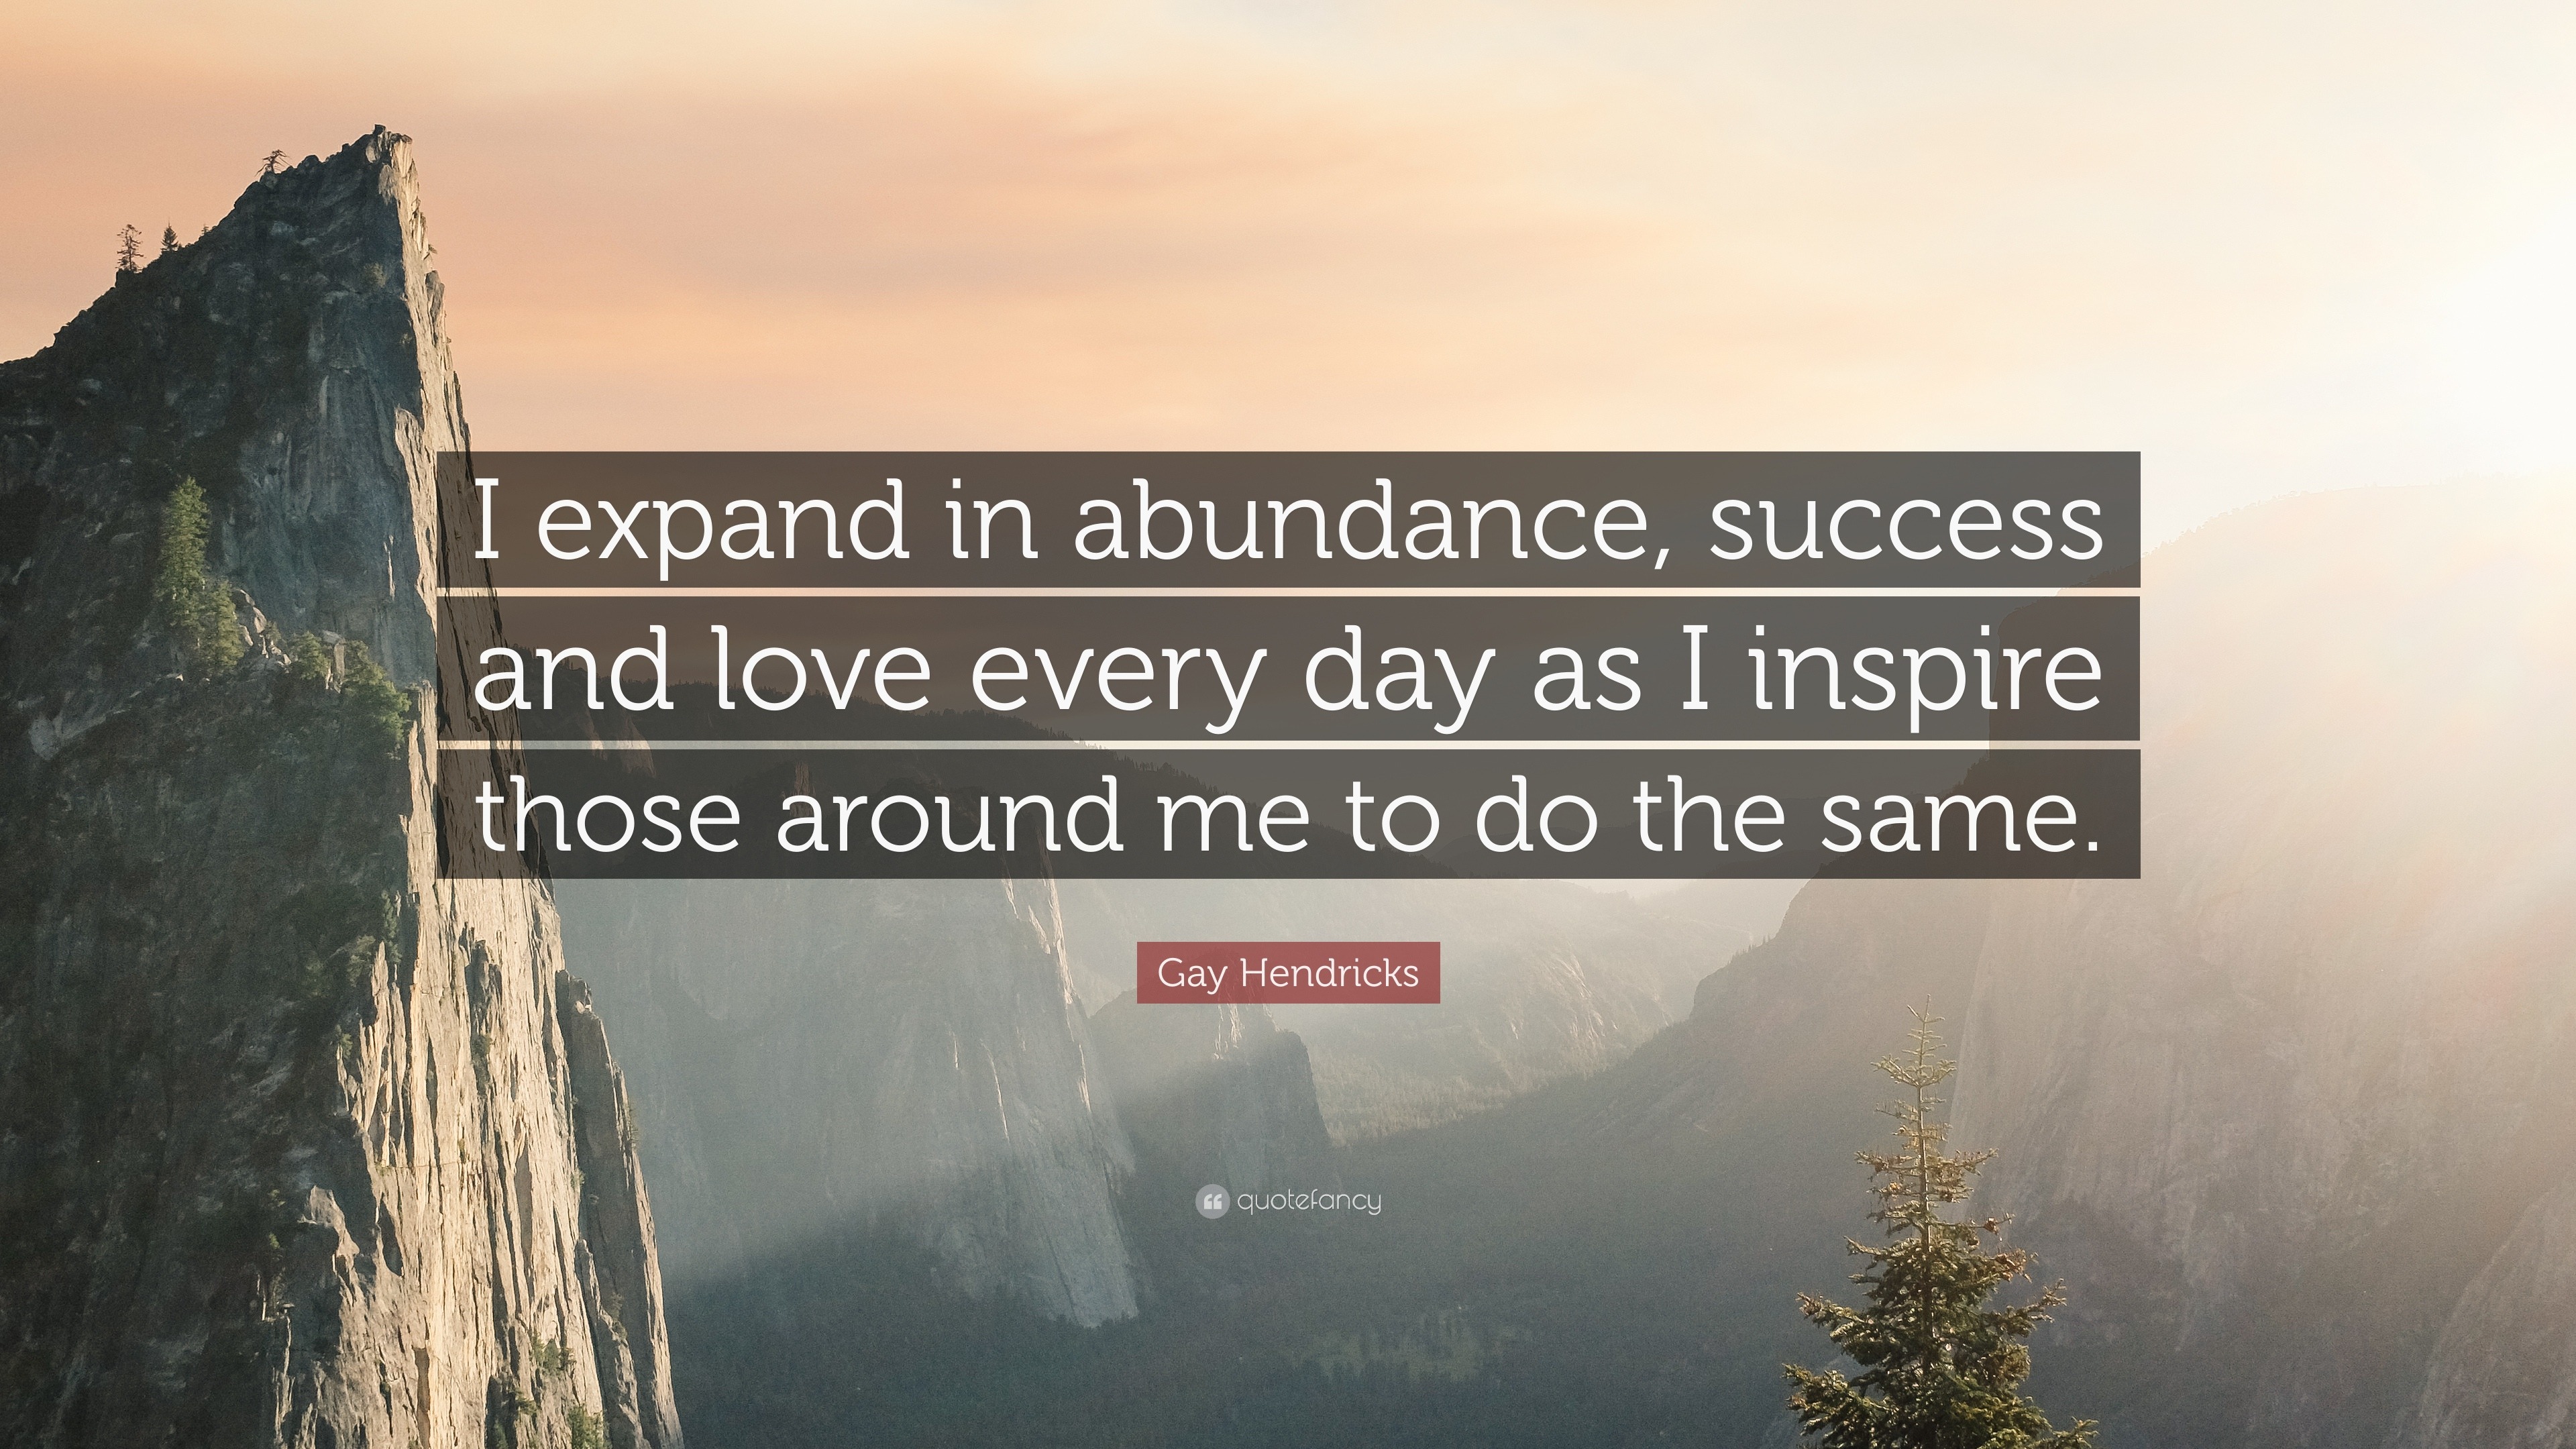 Gay Hendricks Quote “I expand in abundance success and love every day as